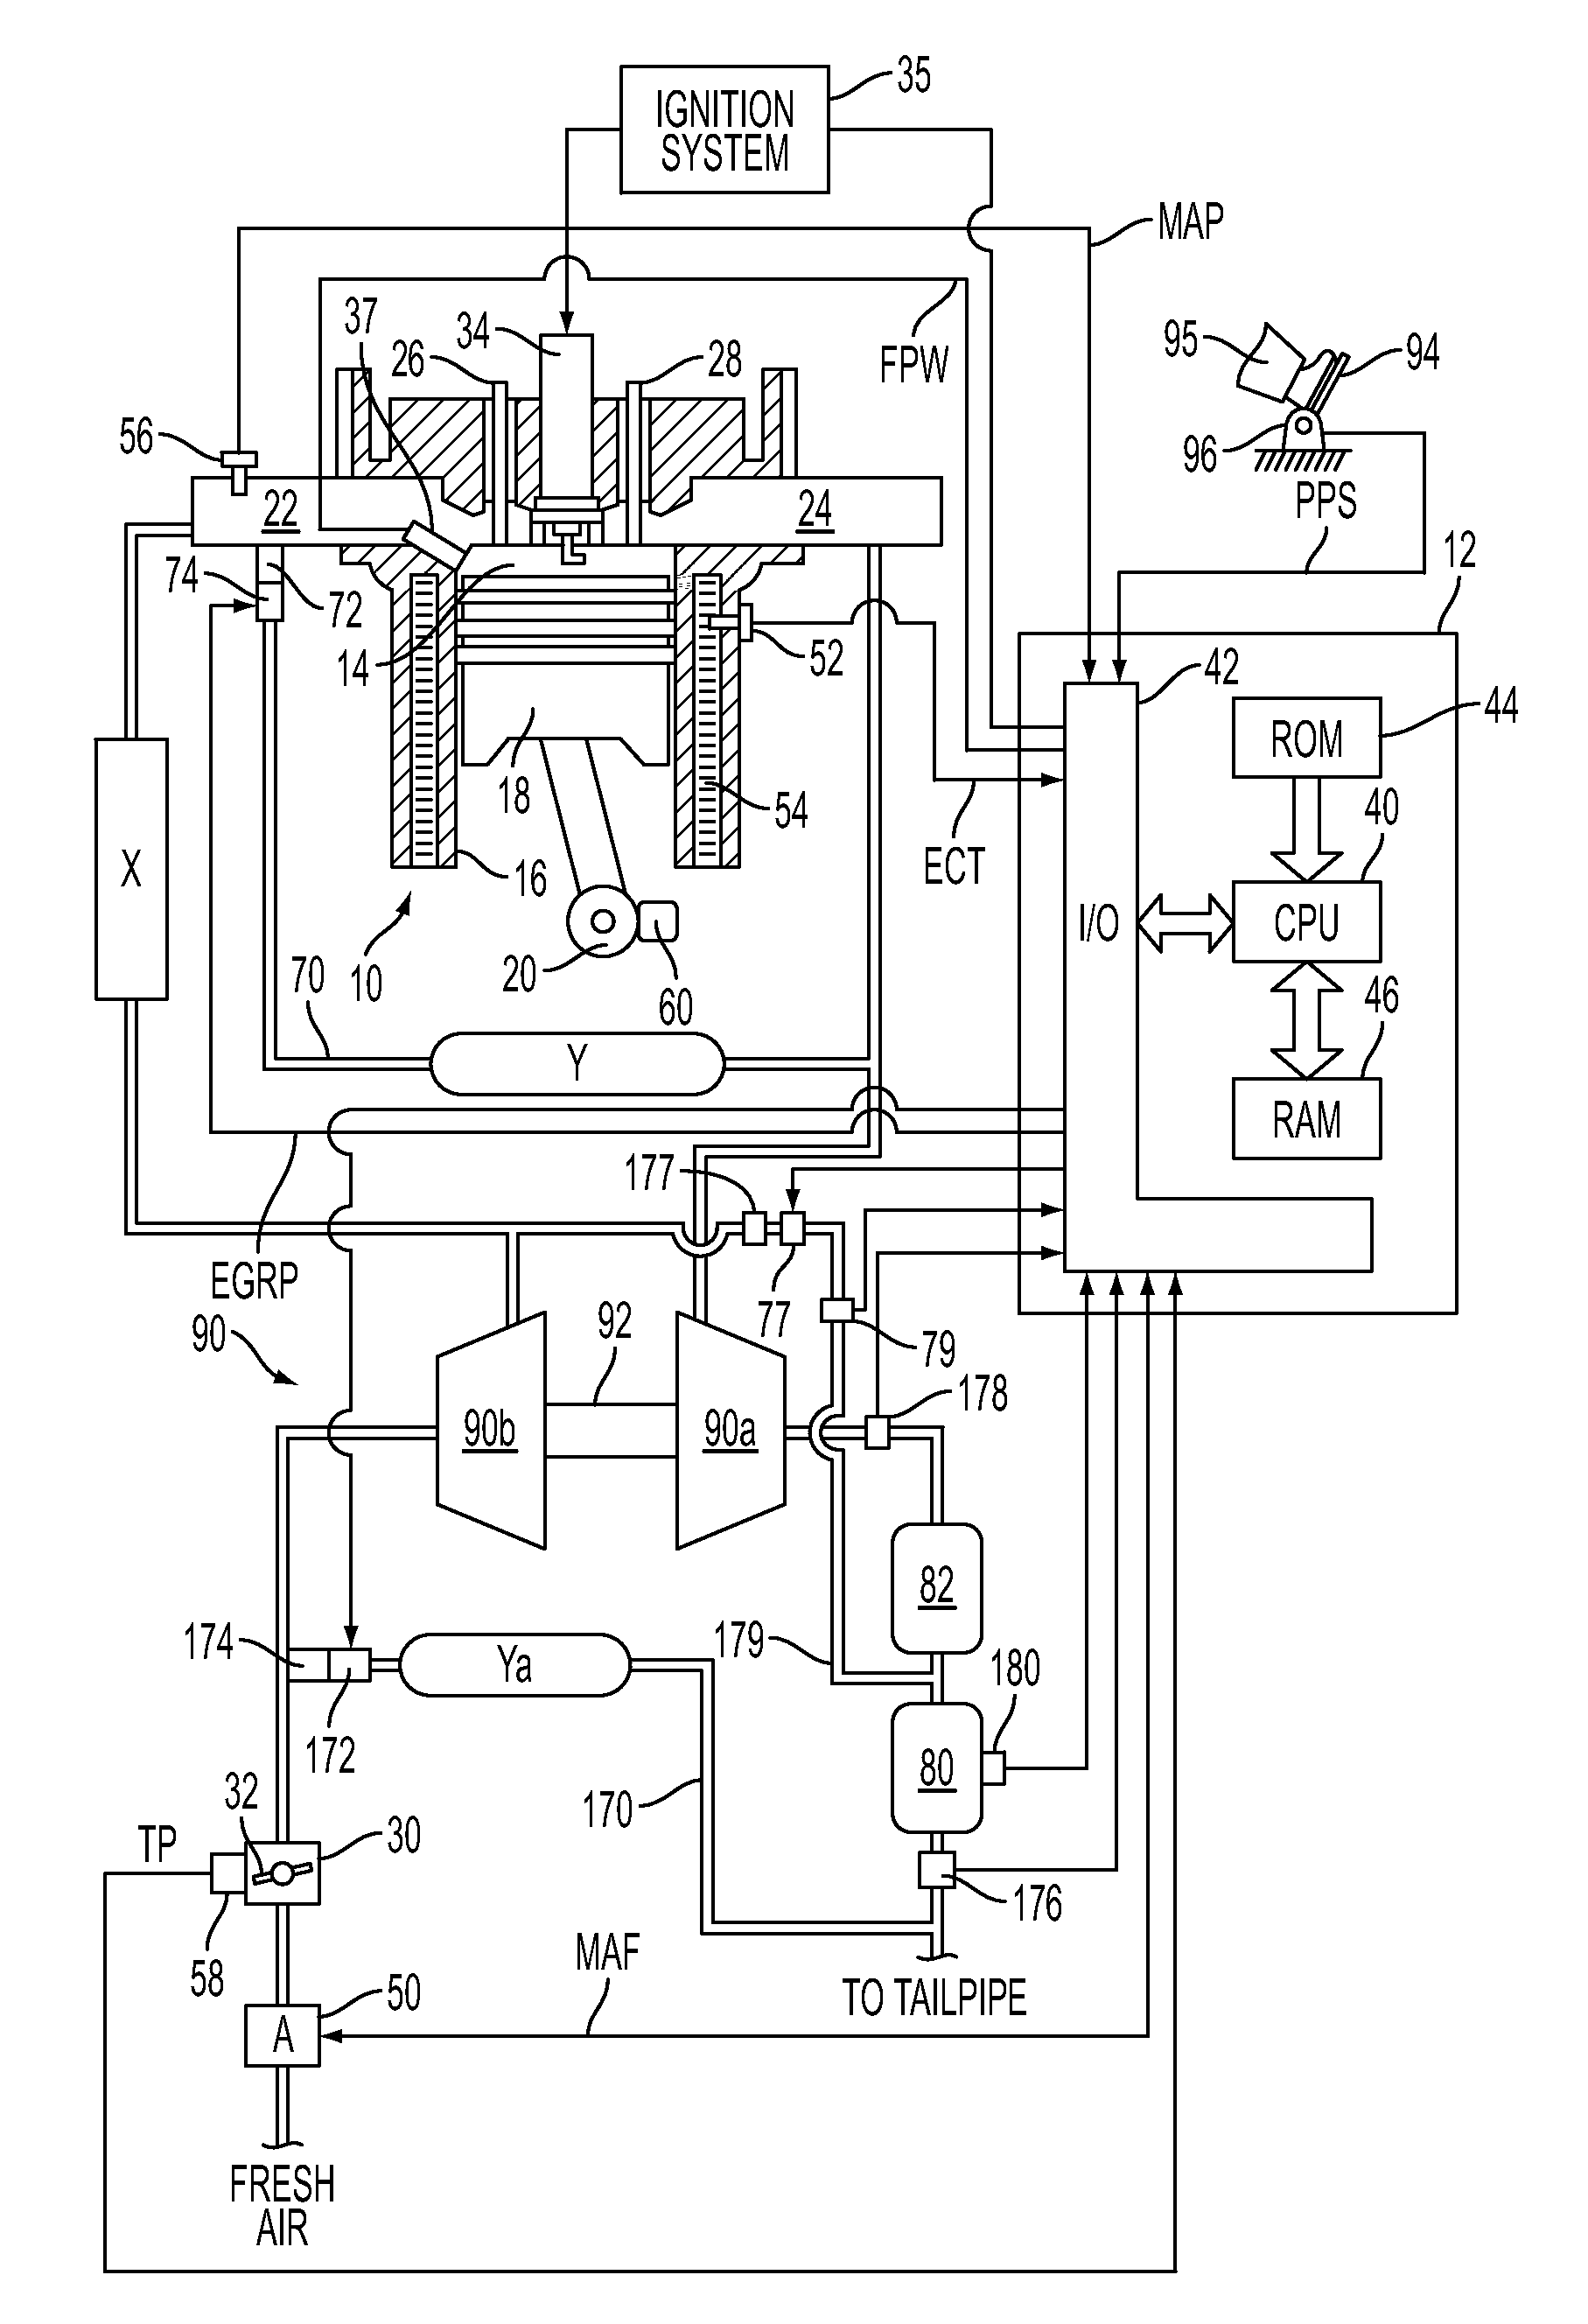 System for regenerating a particulate filter and controlling egr